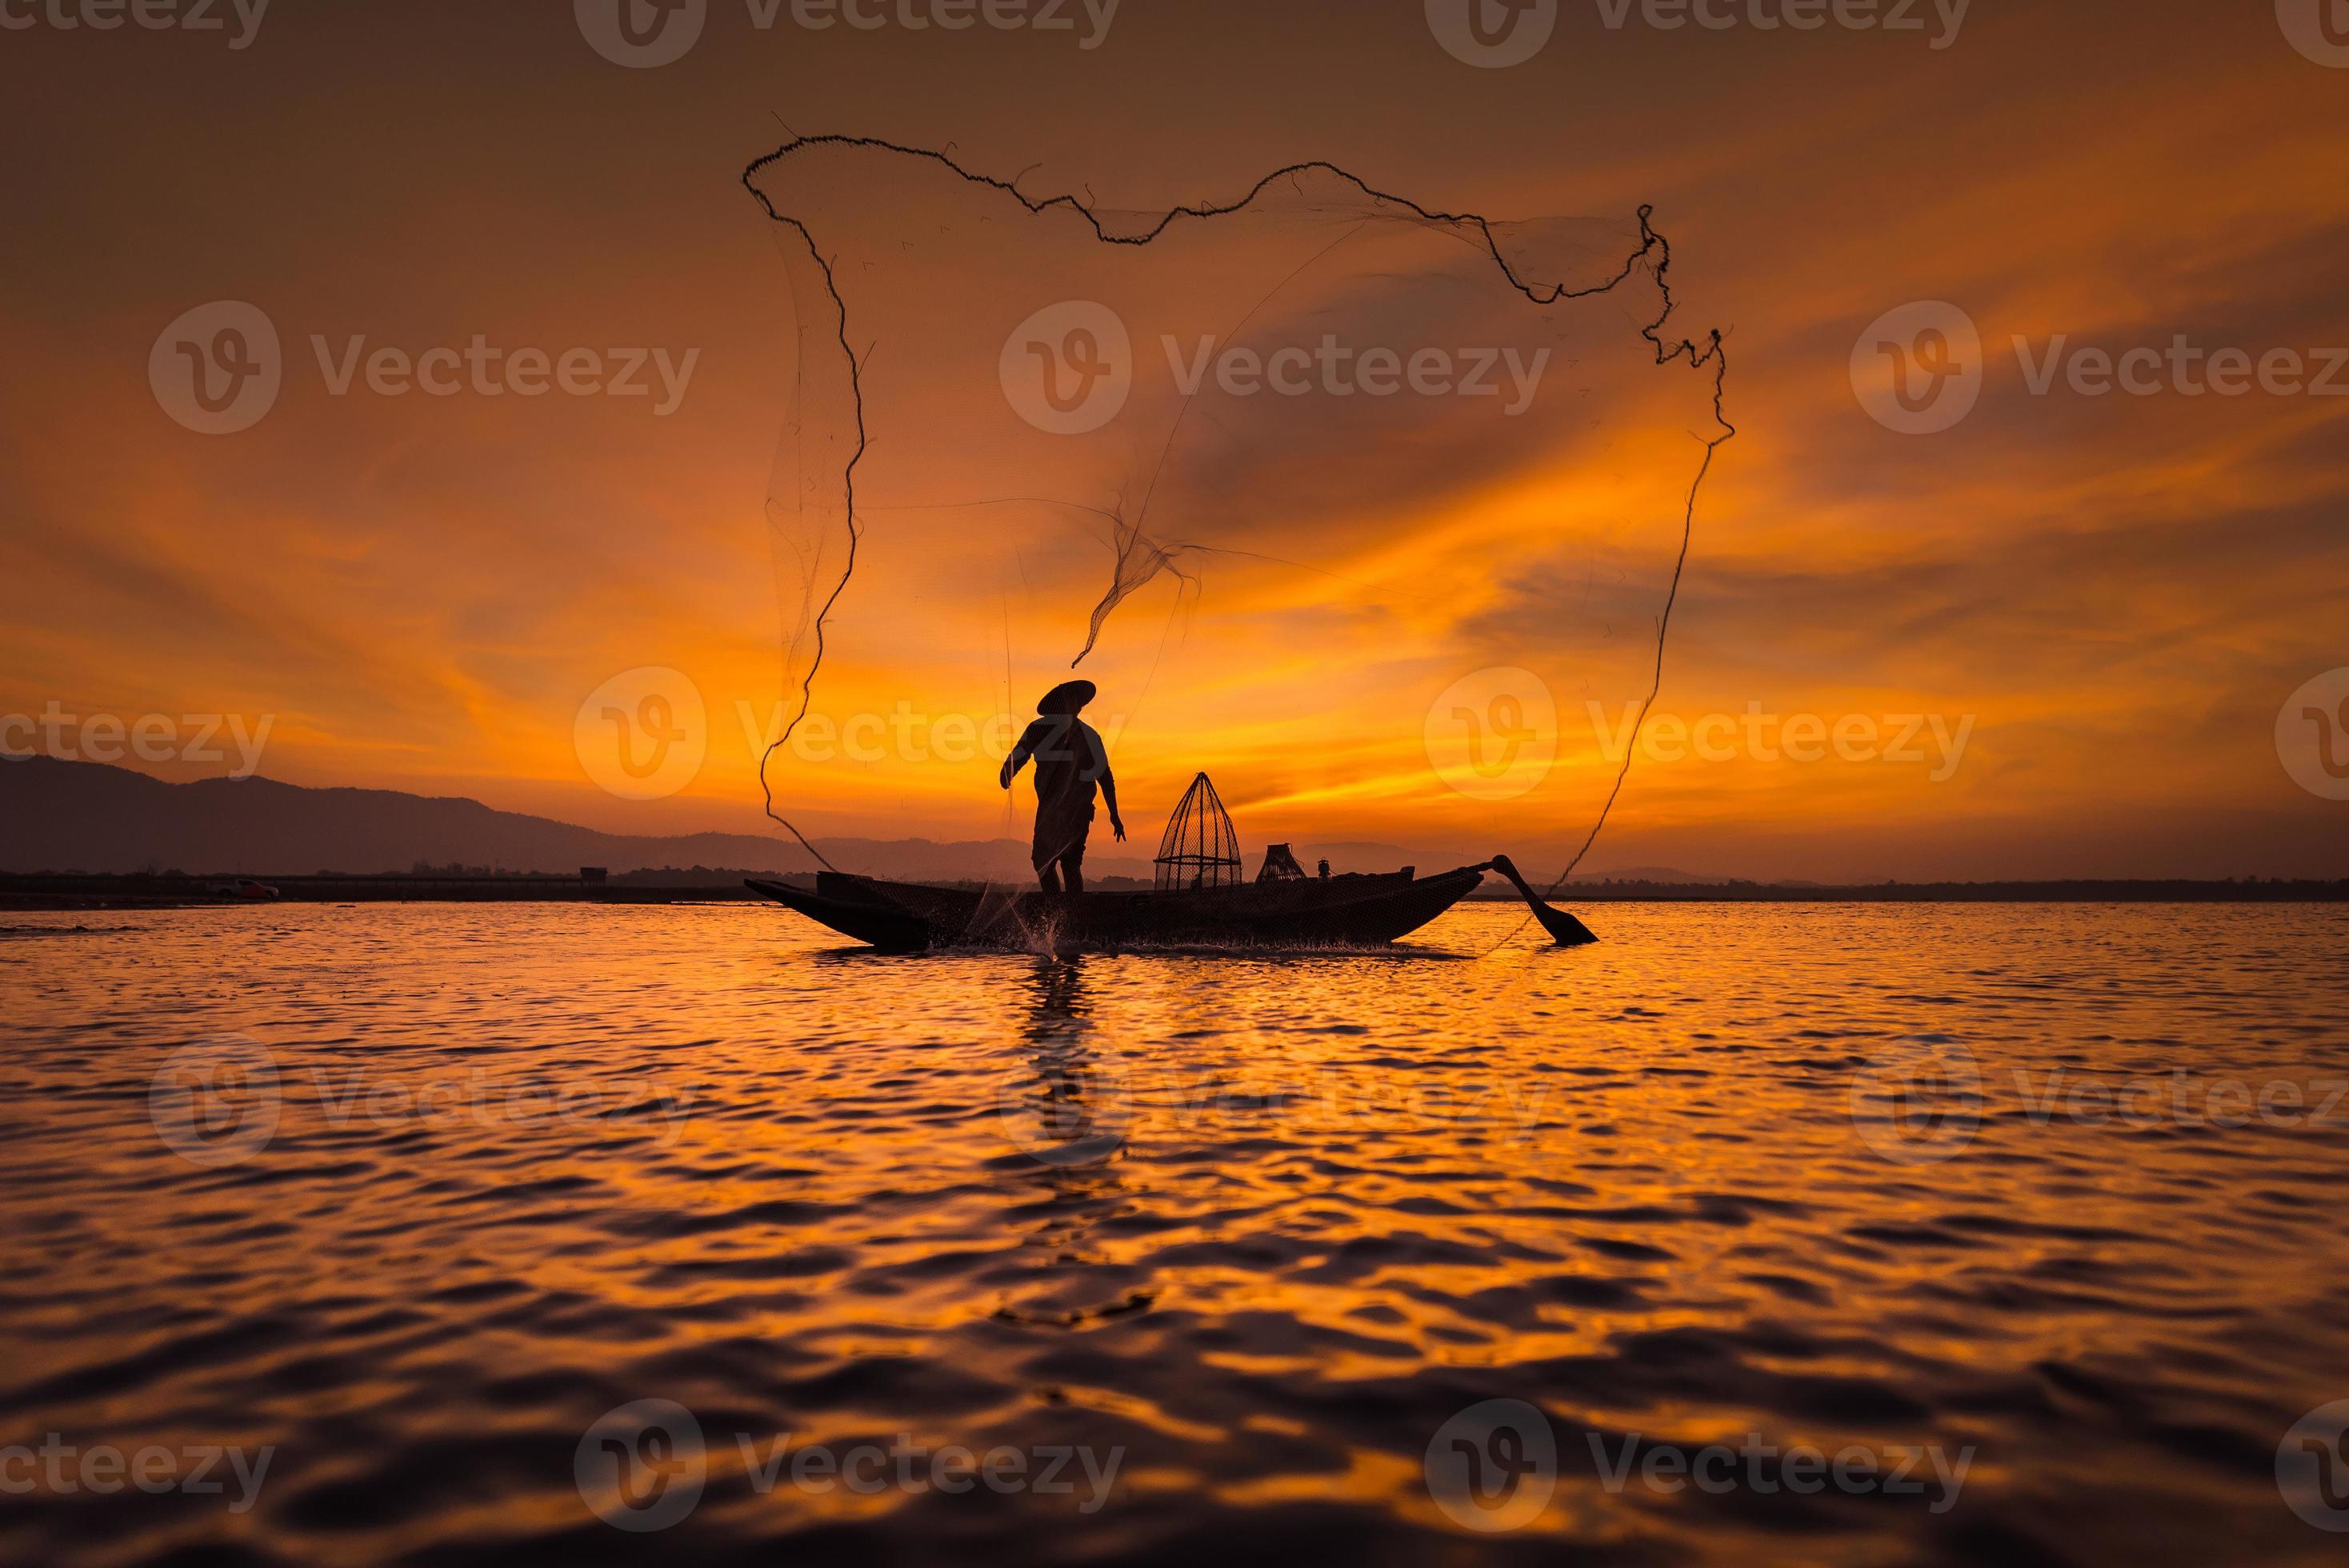 Asian fisherman on wooden boat casting a net for catching